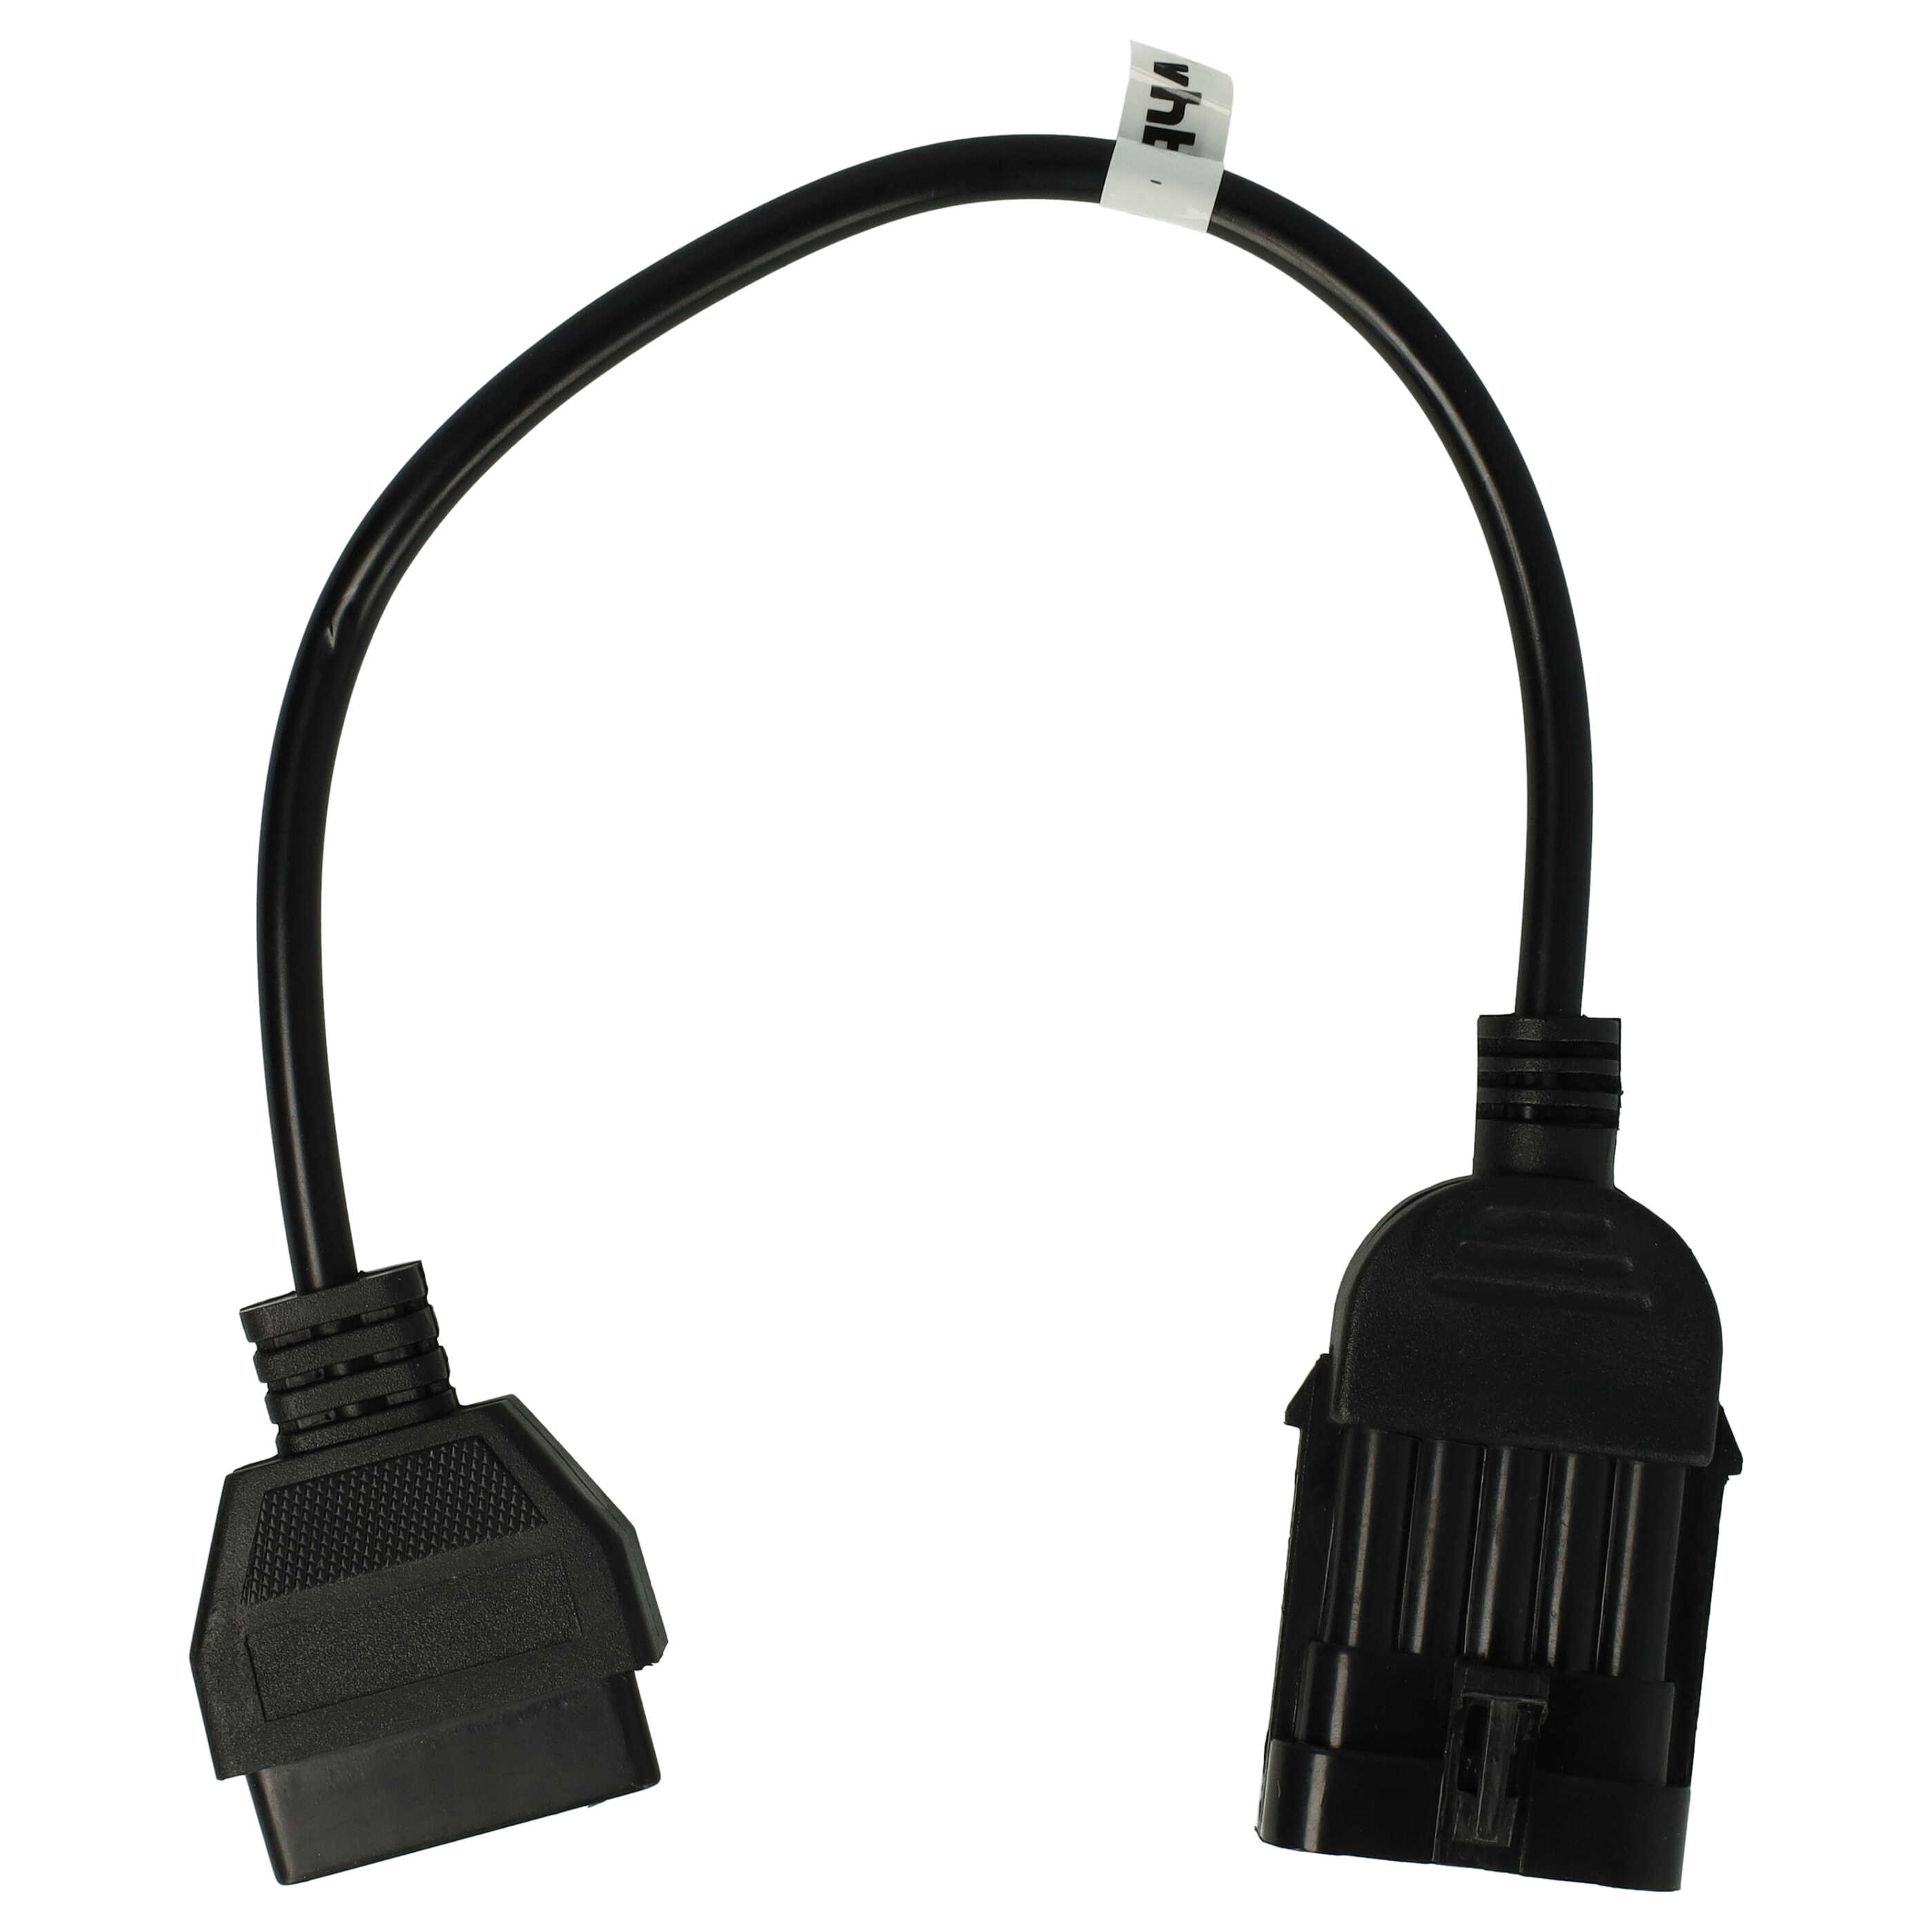 vhbw OBD2 Adapter 10Pin OBD1 to OBD2 suitable for Opel -Bj 1997 Astra Vehicle - 30 cm